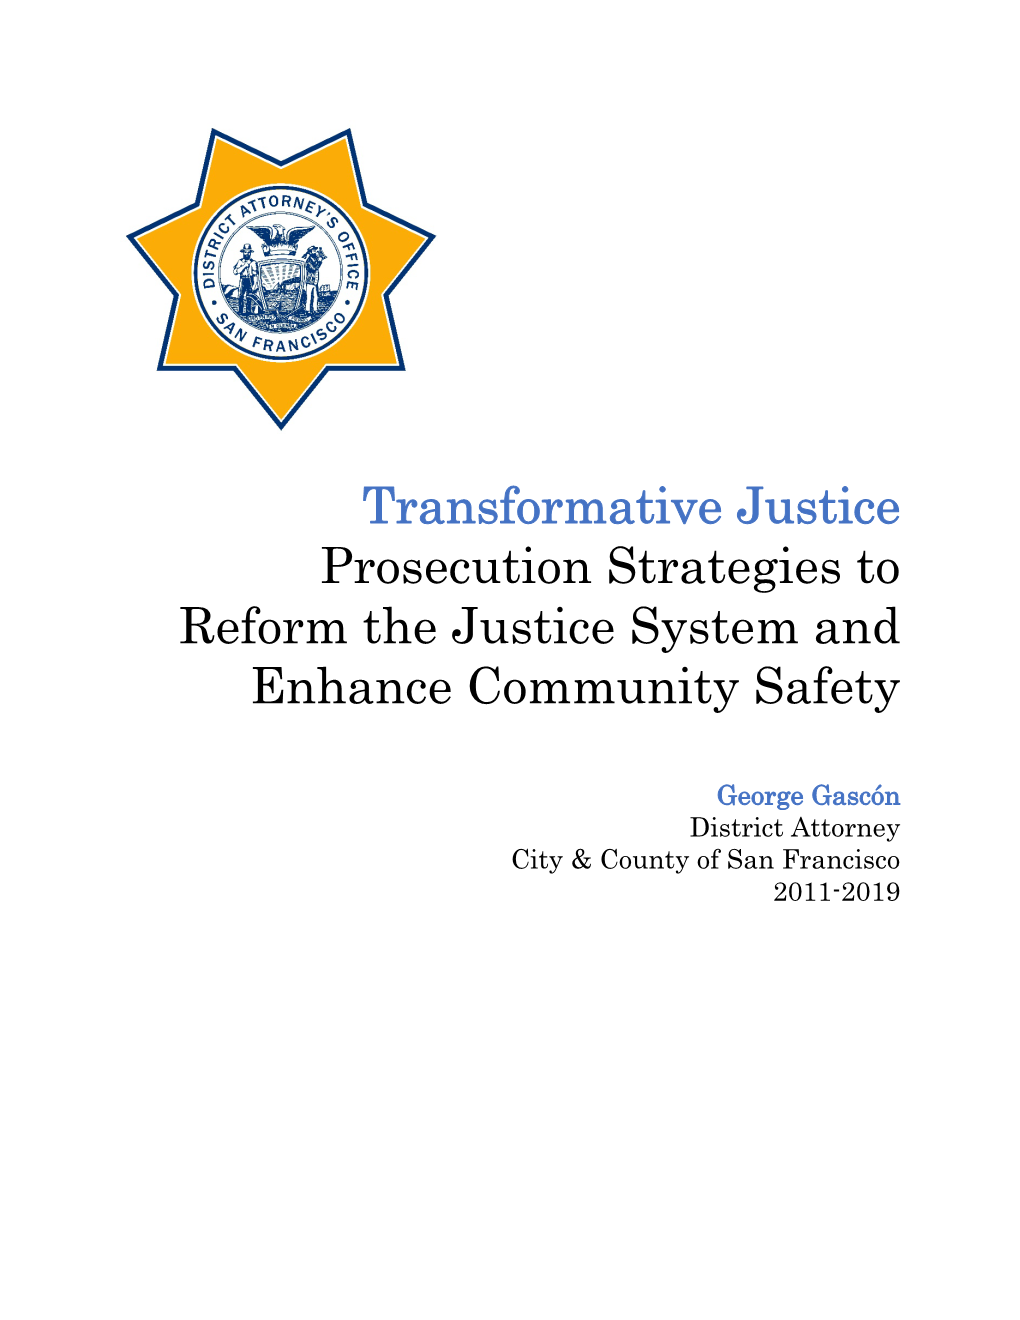 Transformative Justice Prosecution Strategies to Reform the Justice System and Enhance Community Safety